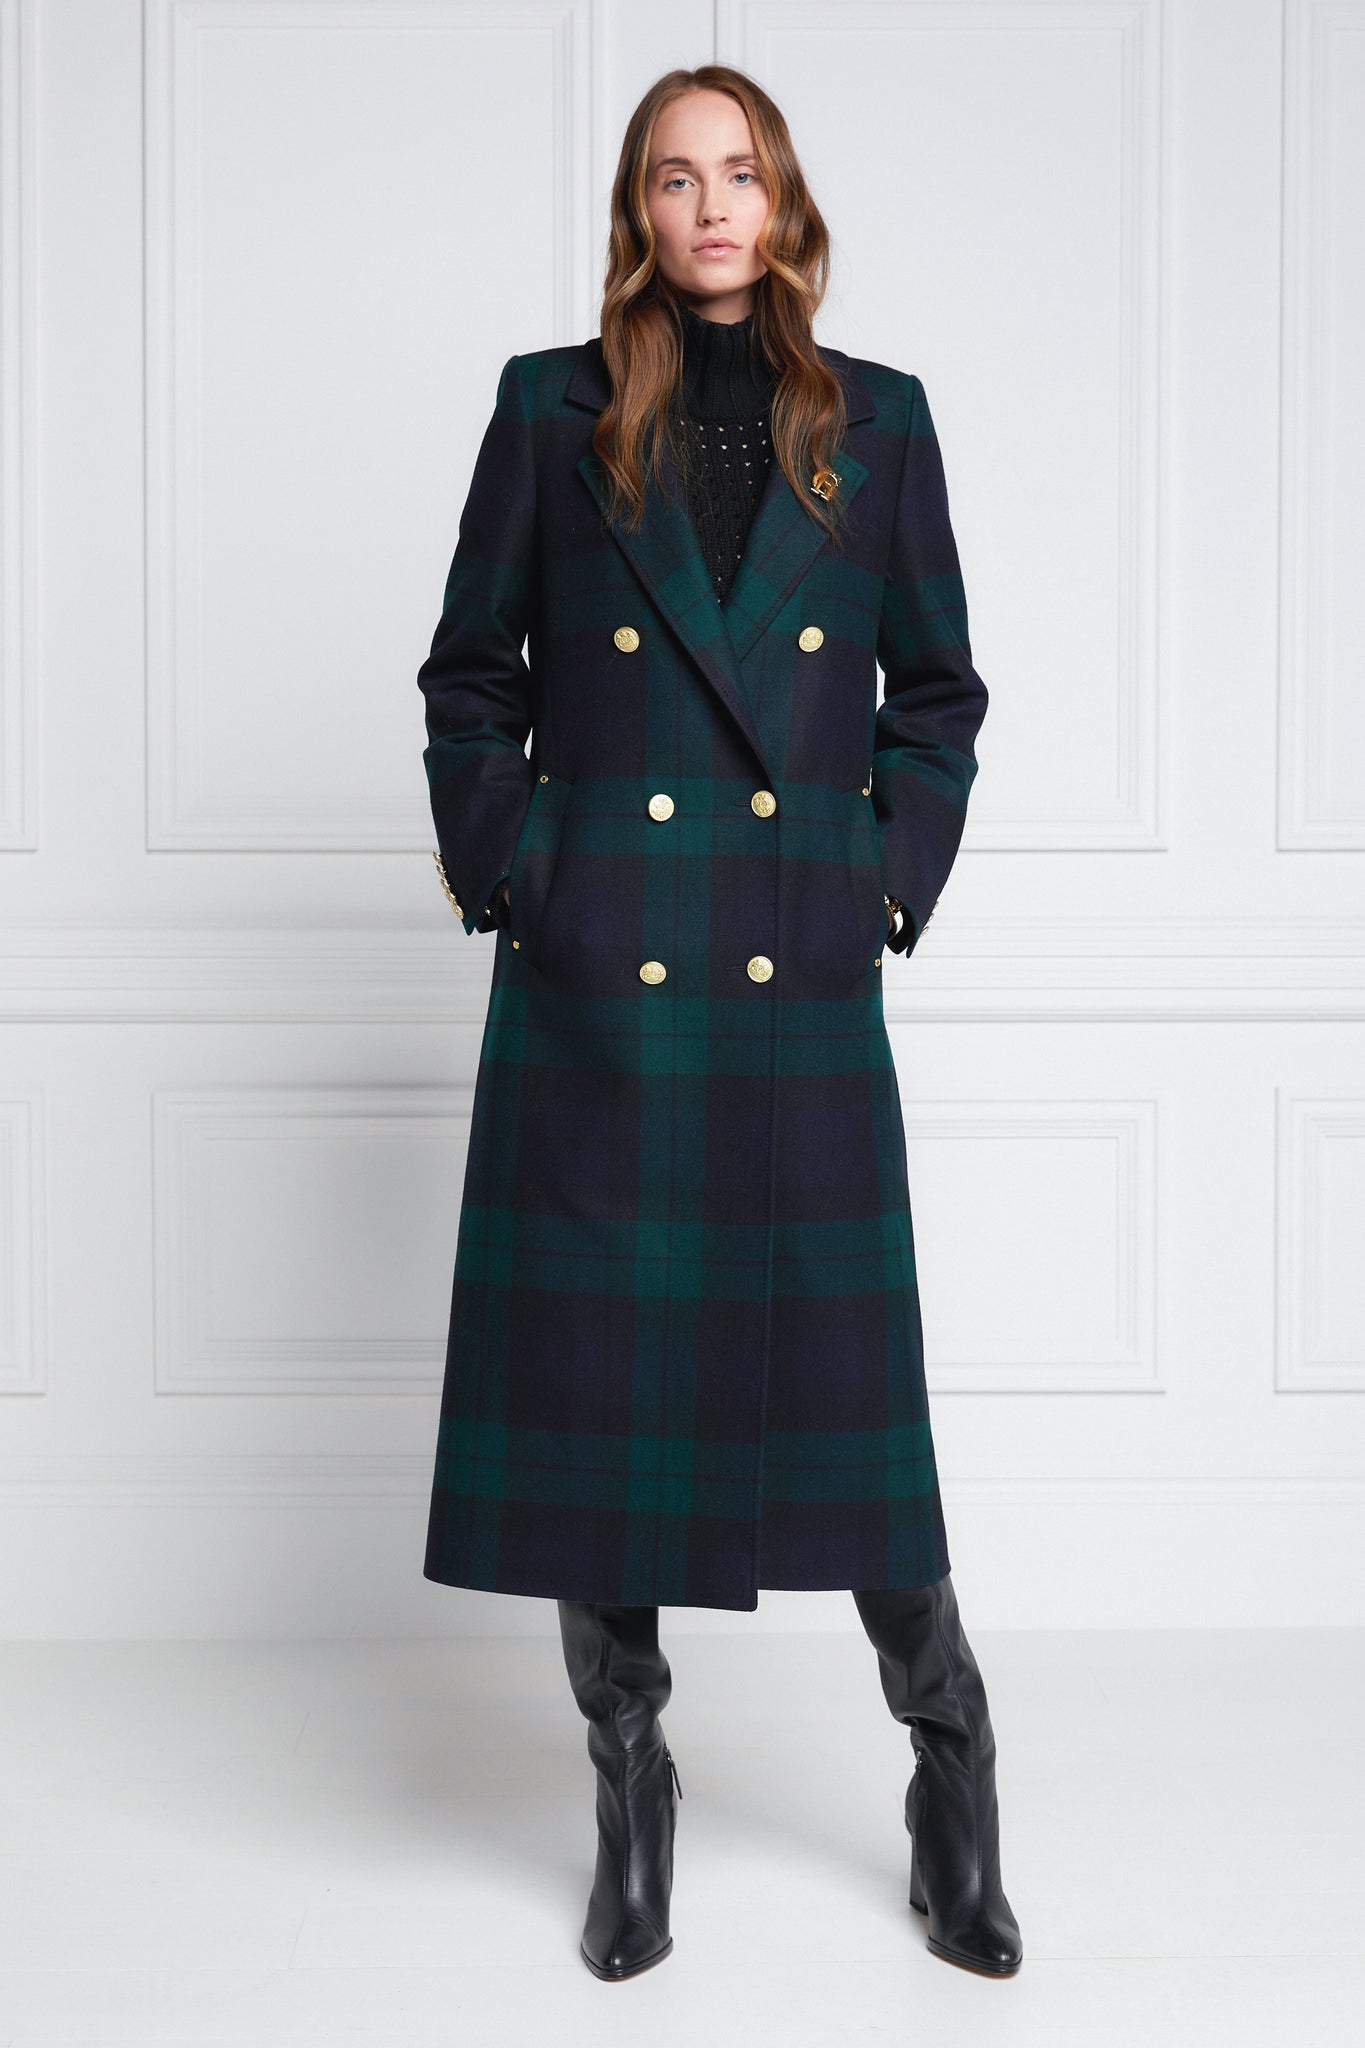 Womens blackwatch navy and green double breasted mid-length tartan tweed coat 